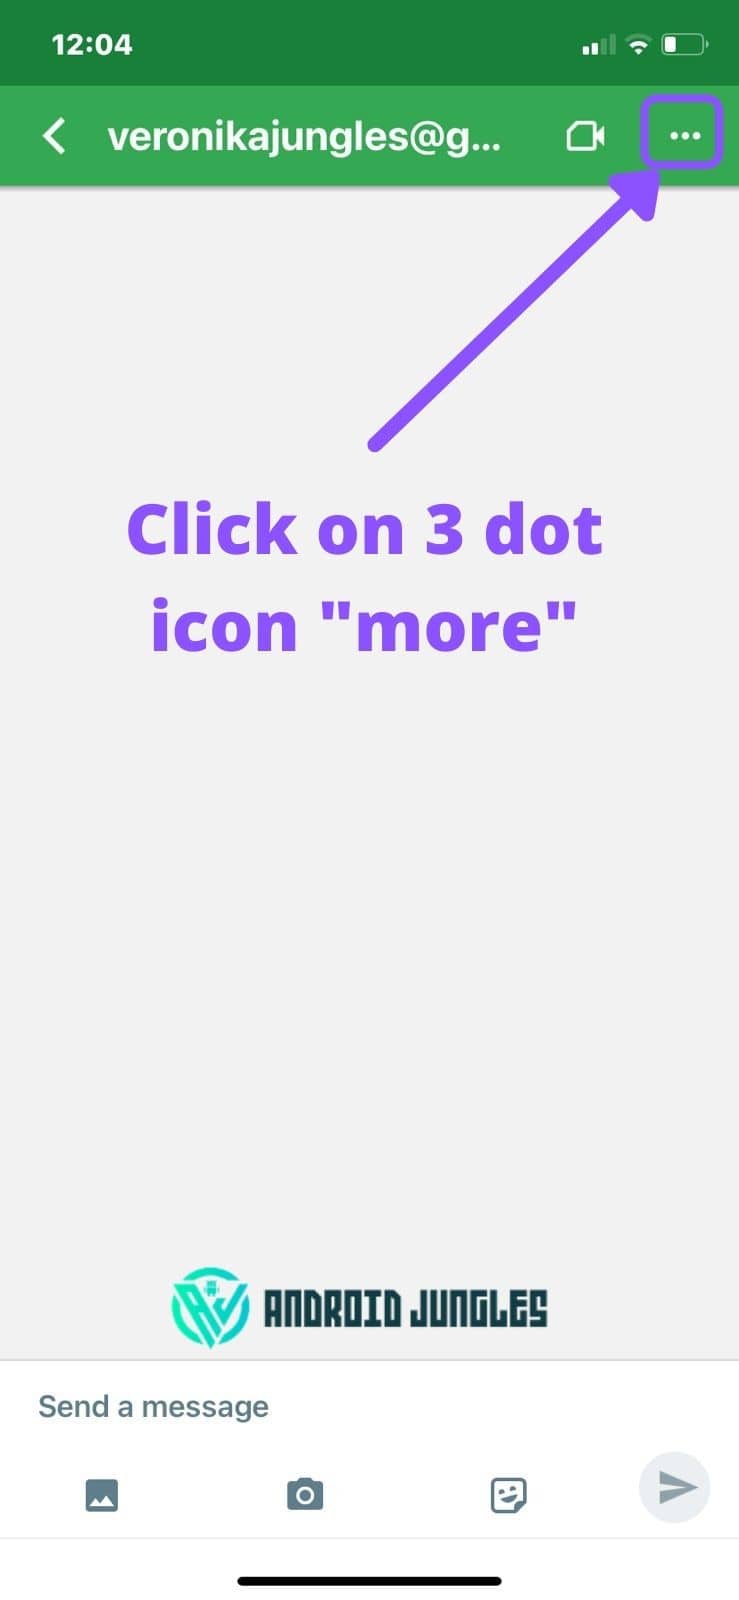 click on 3 dot icon